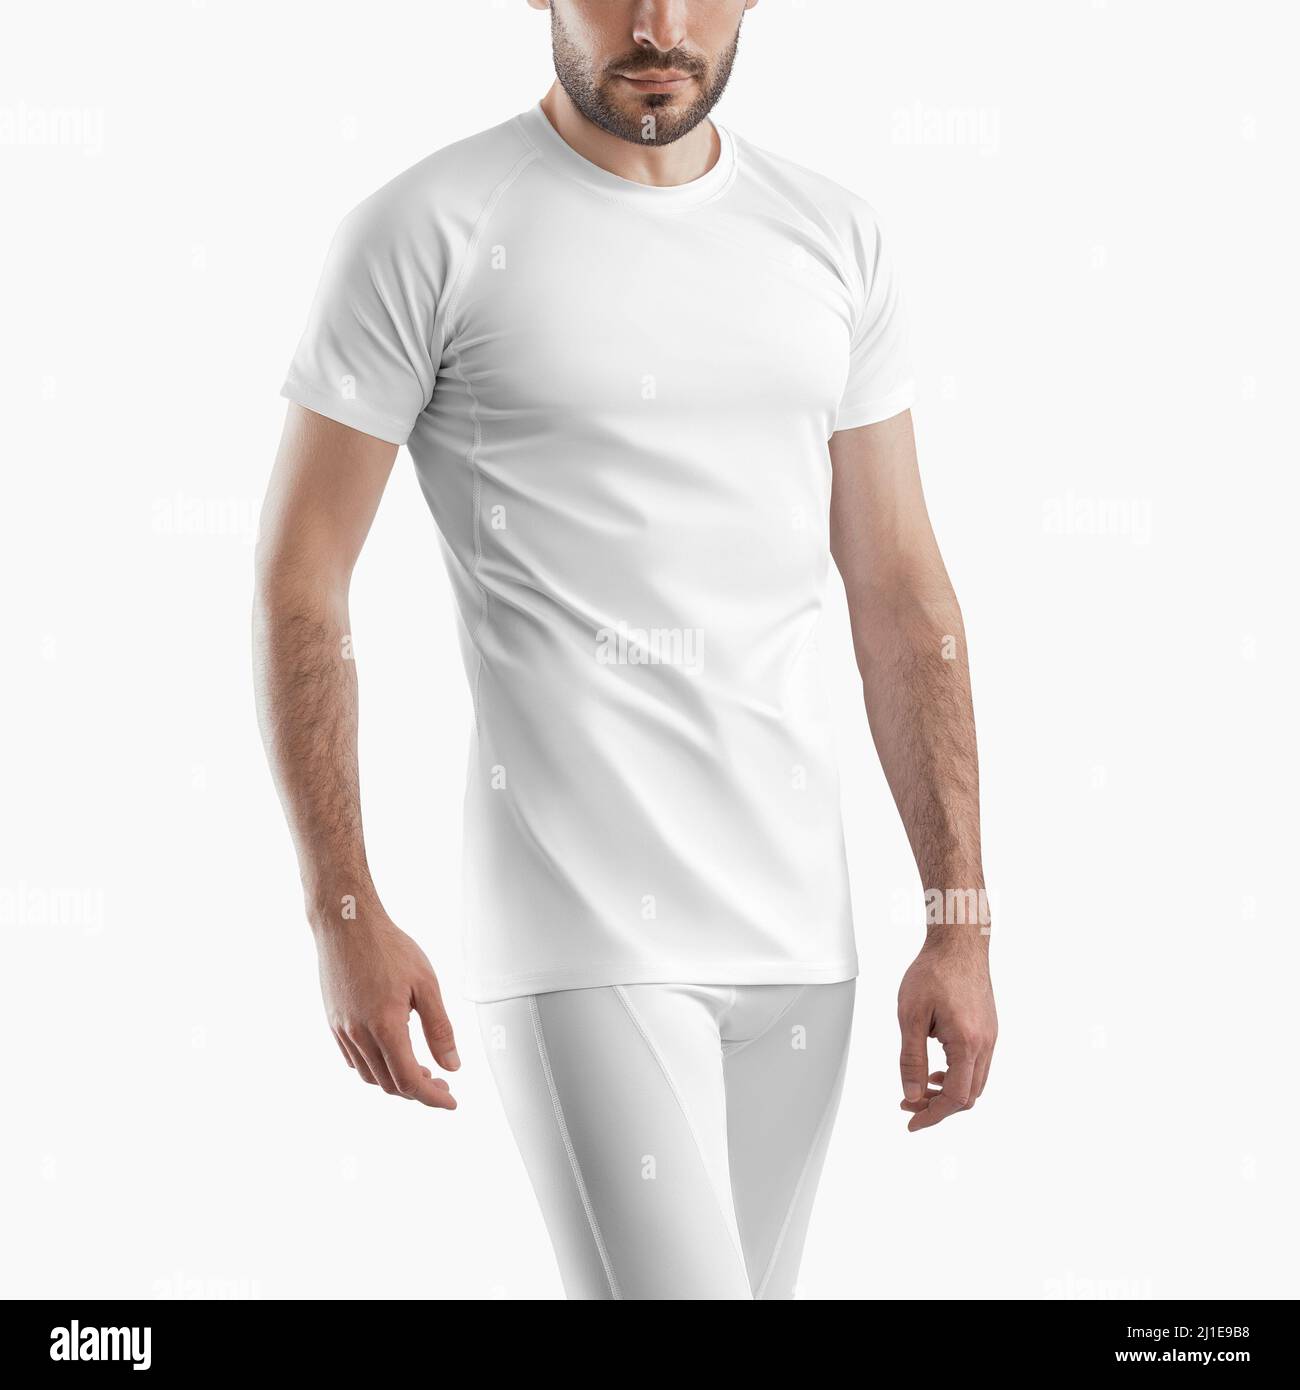 Mockup of sports compression pants and t-shirt on a man for design presentation. Template of sportswear isolated on background. Stock Photo